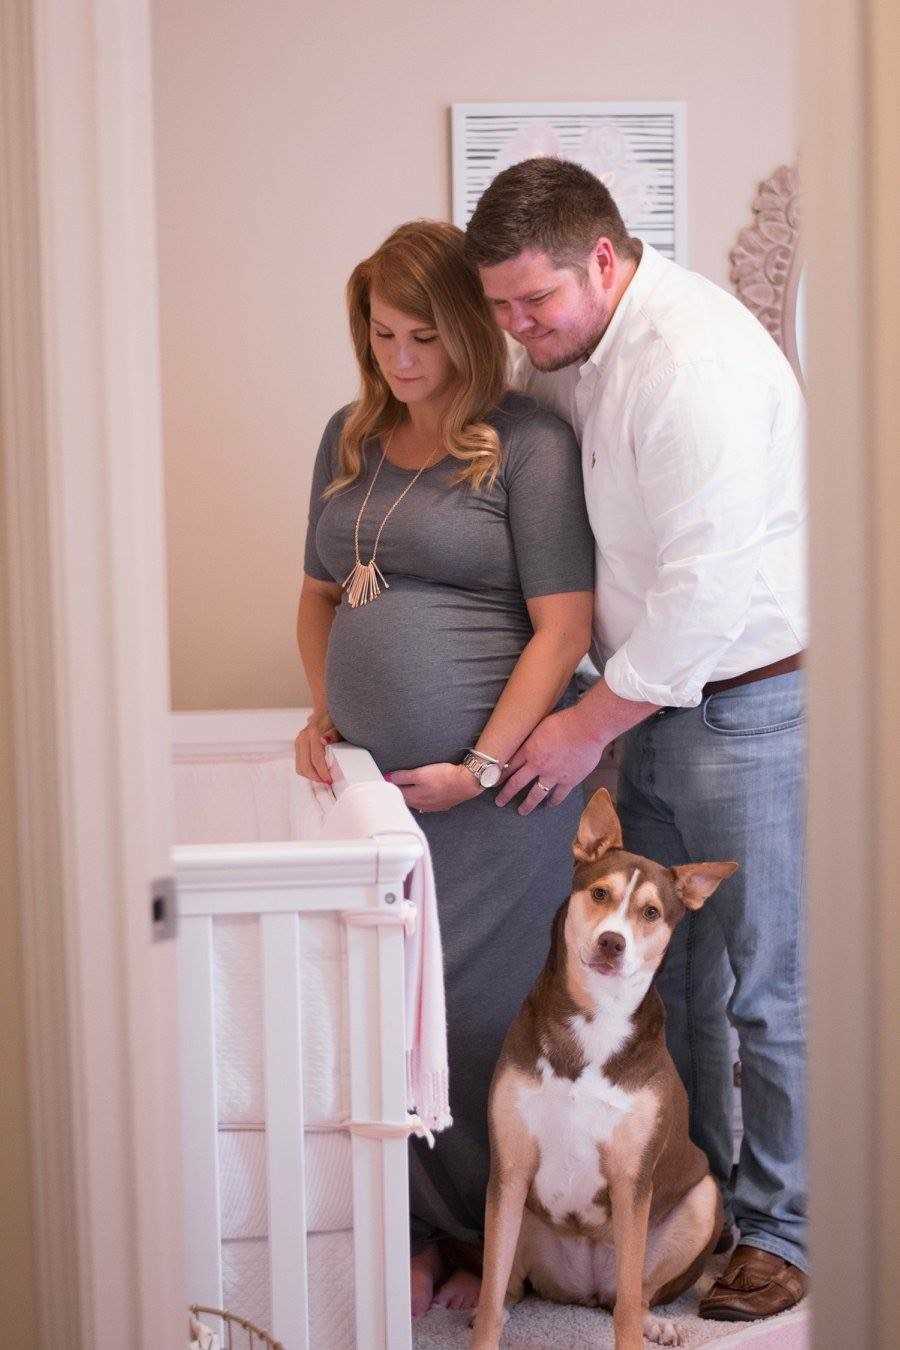 Husband stands behind pregnant wife as they look at crib in baby's nursery beside their dog